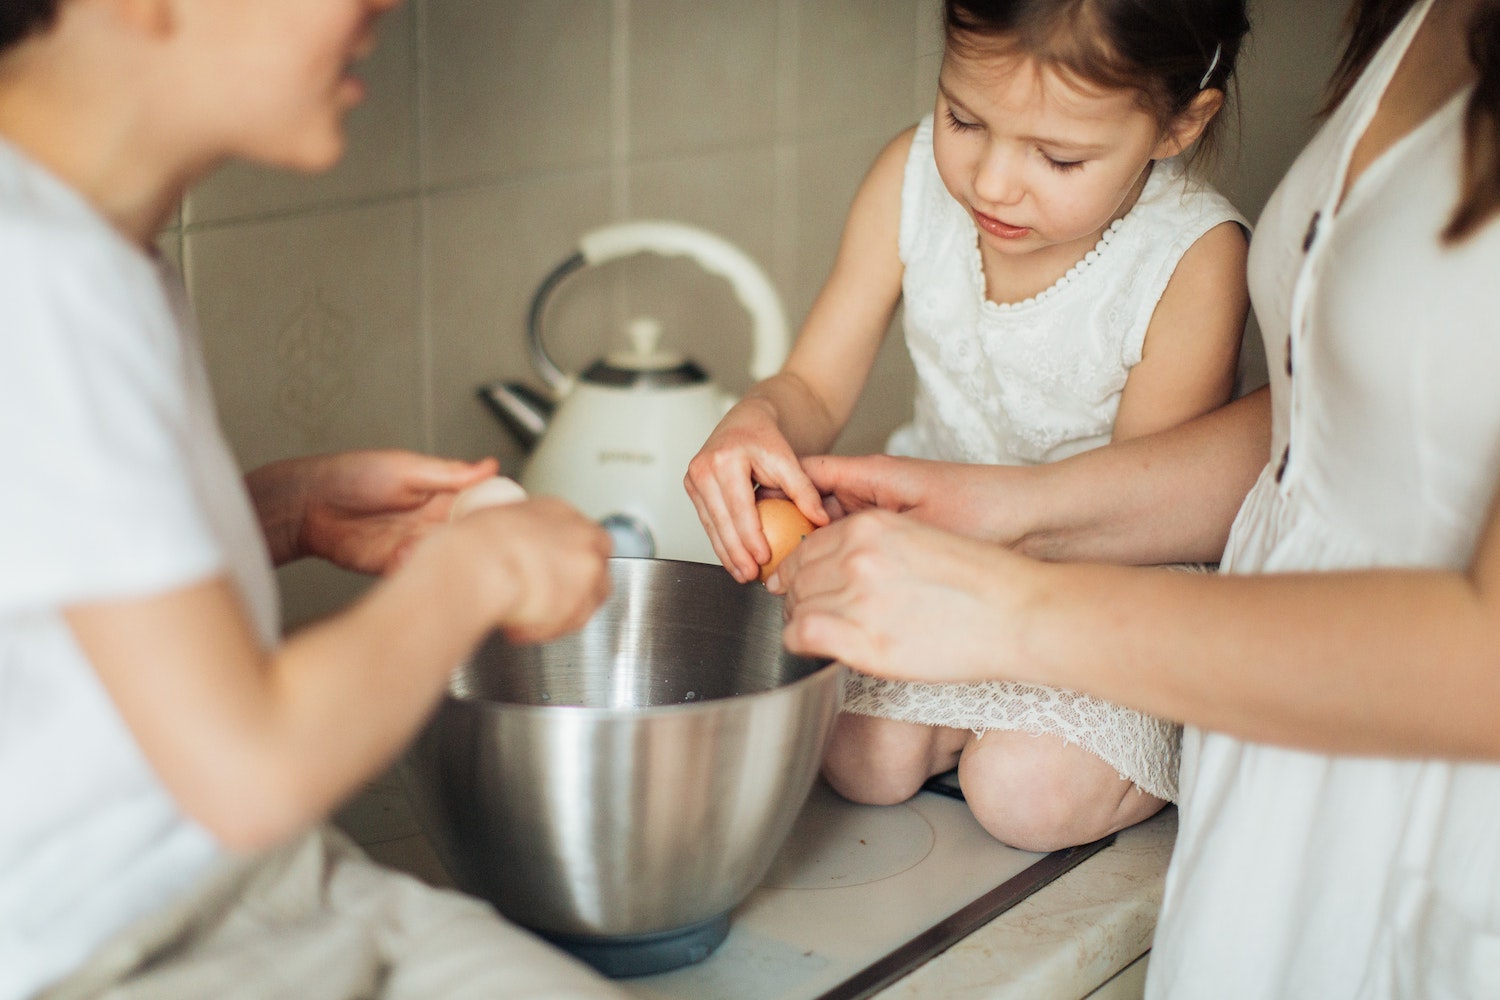 6 Snow Day Activities for Kids in the Kitchen